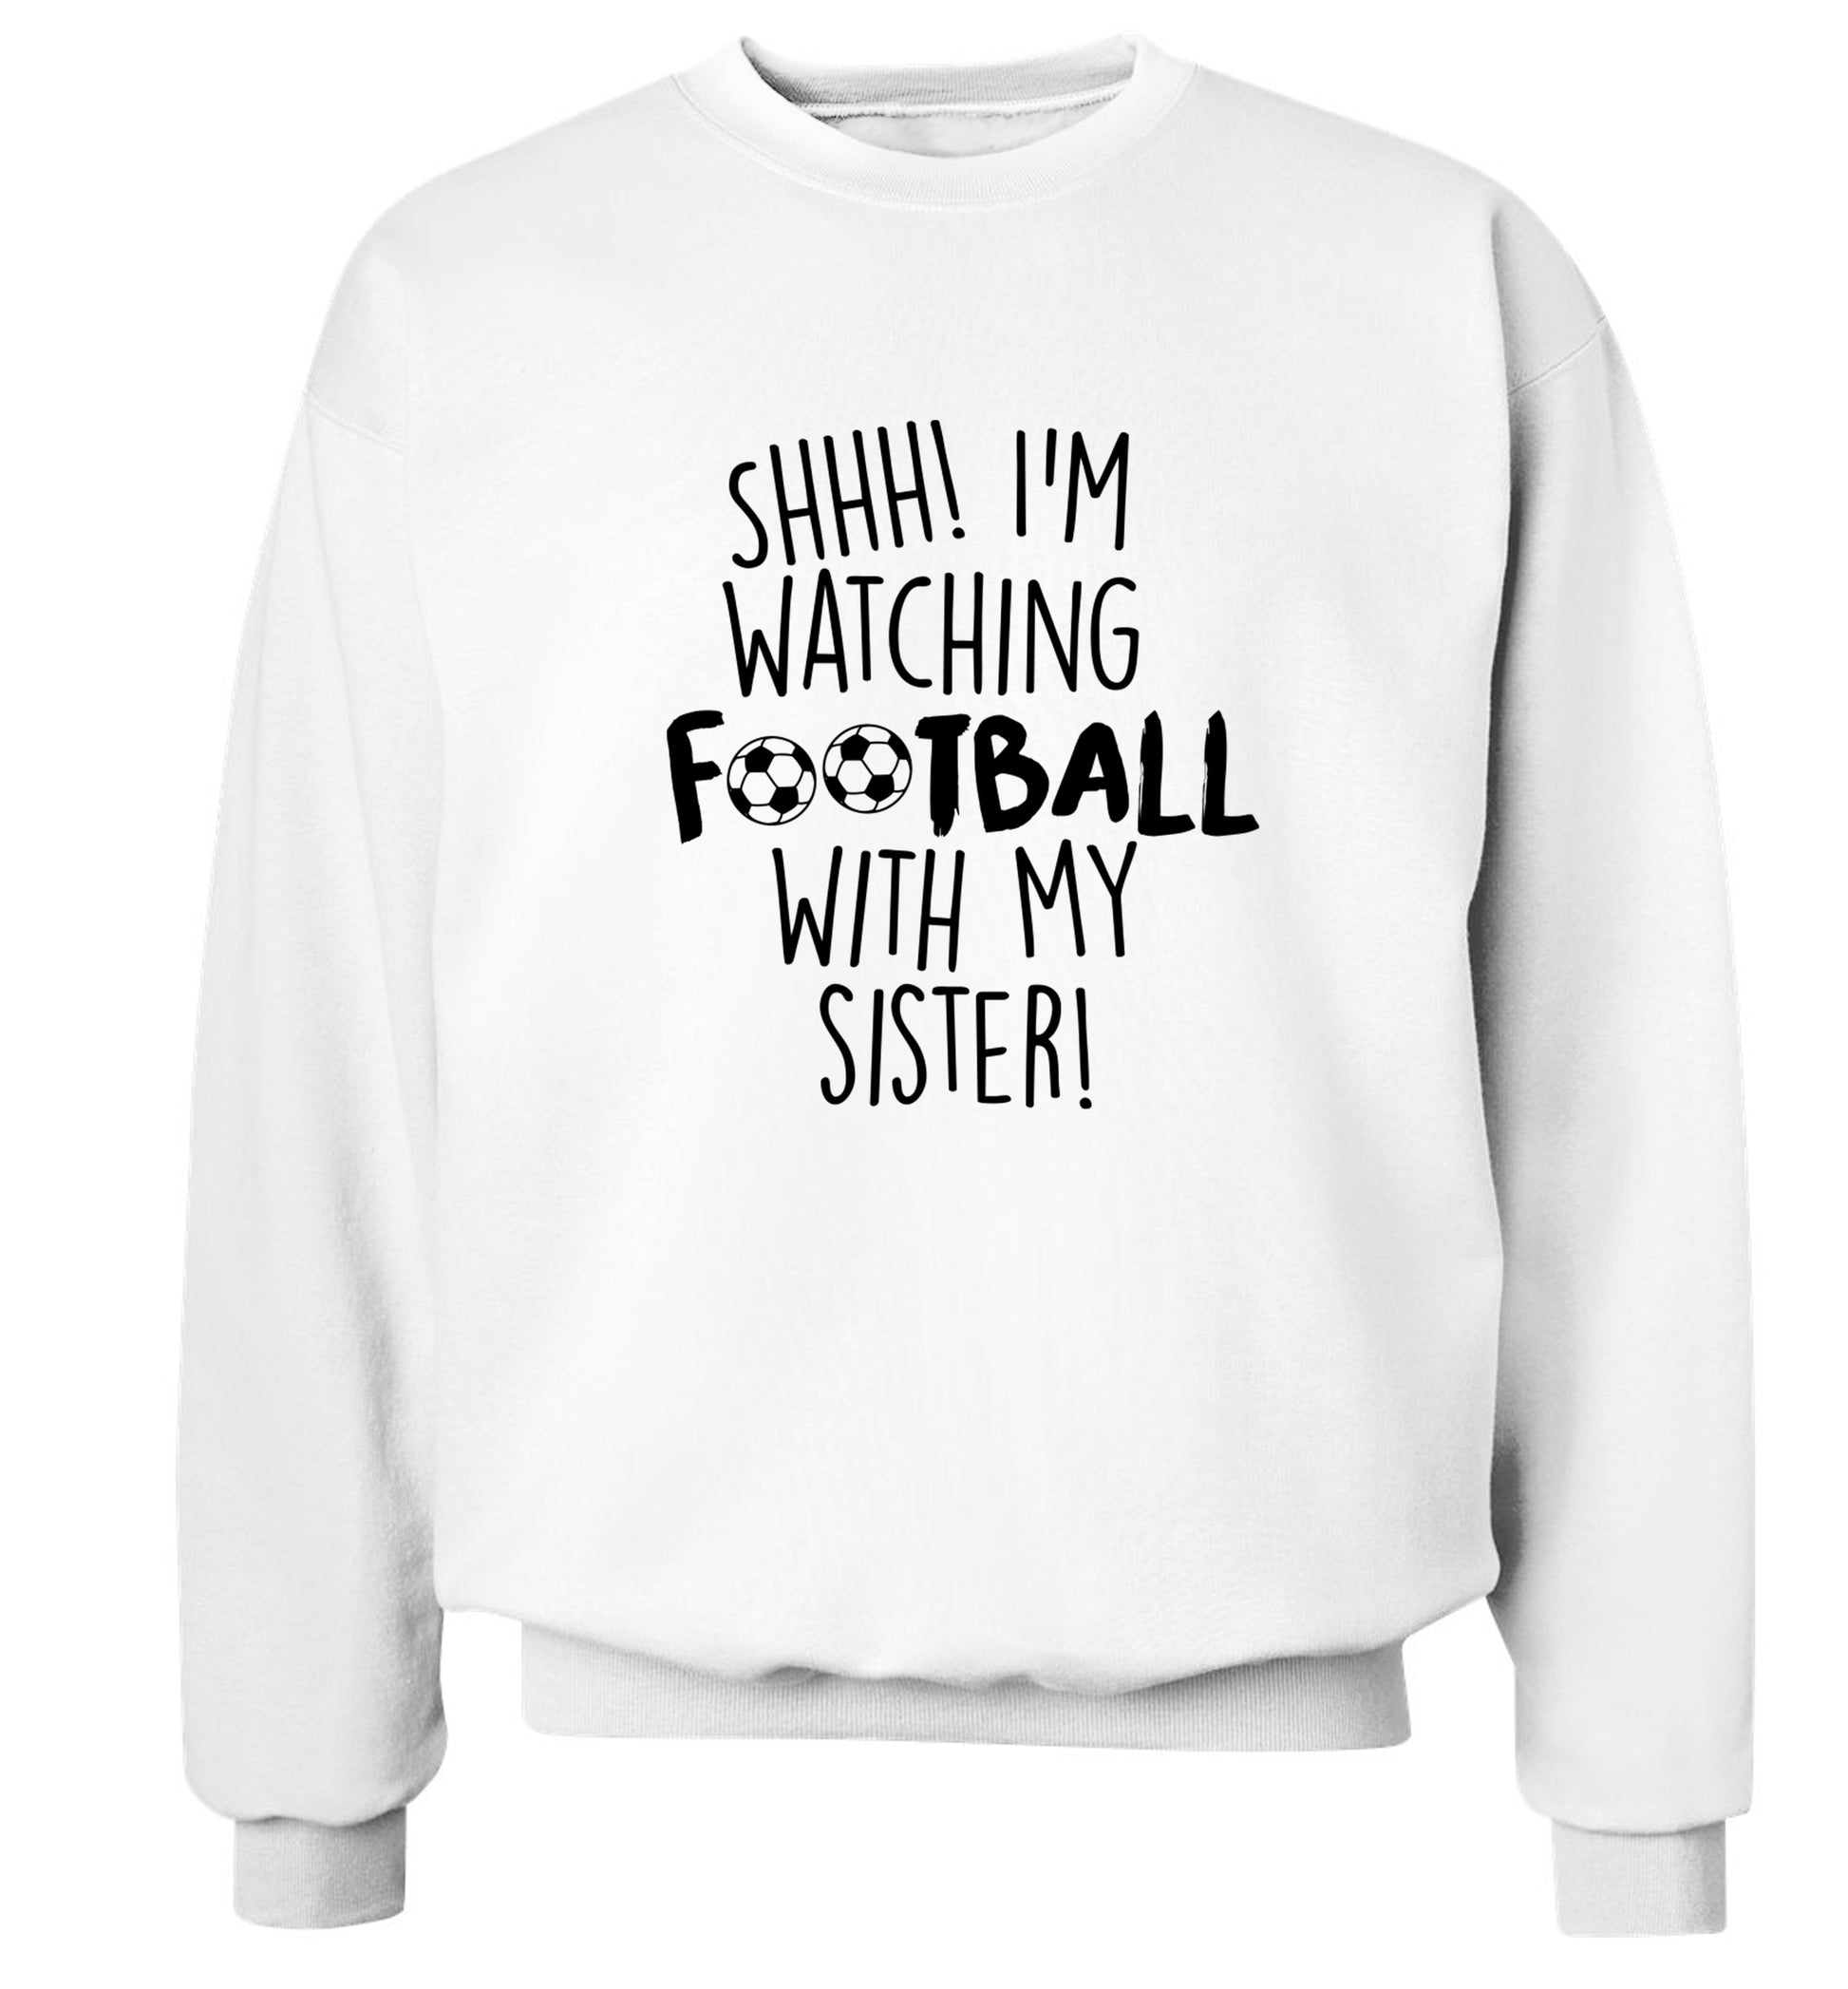 Shhh I'm watching football with my sister Adult's unisexwhite Sweater 2XL